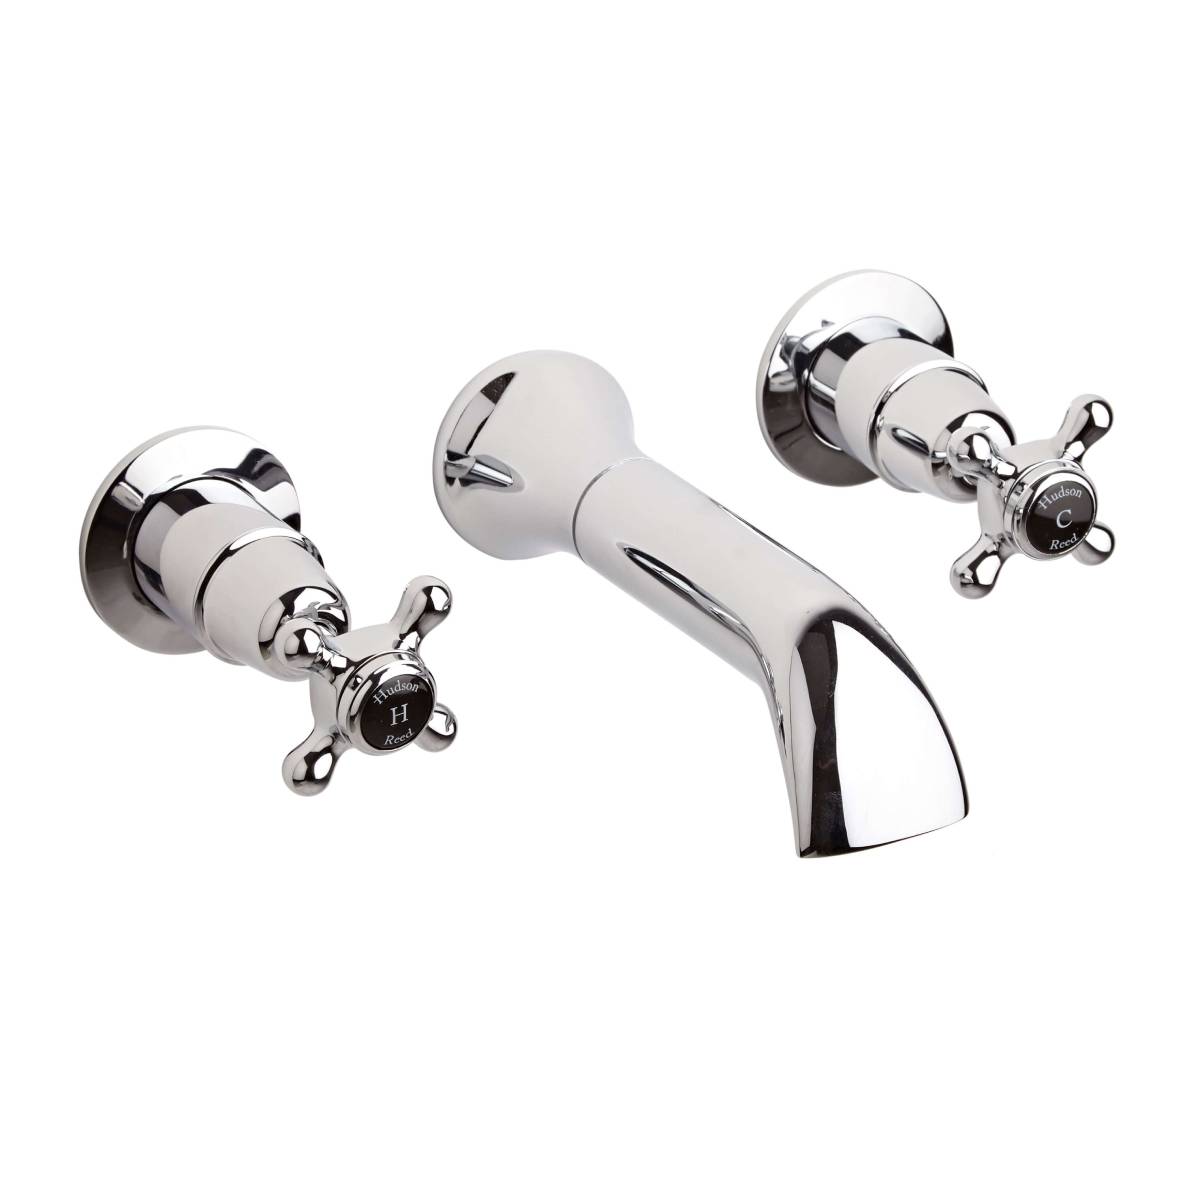 Hudson Reed Topaz with Crosshead Bath Spout & Domed Collar - Black BC409DX (2418)